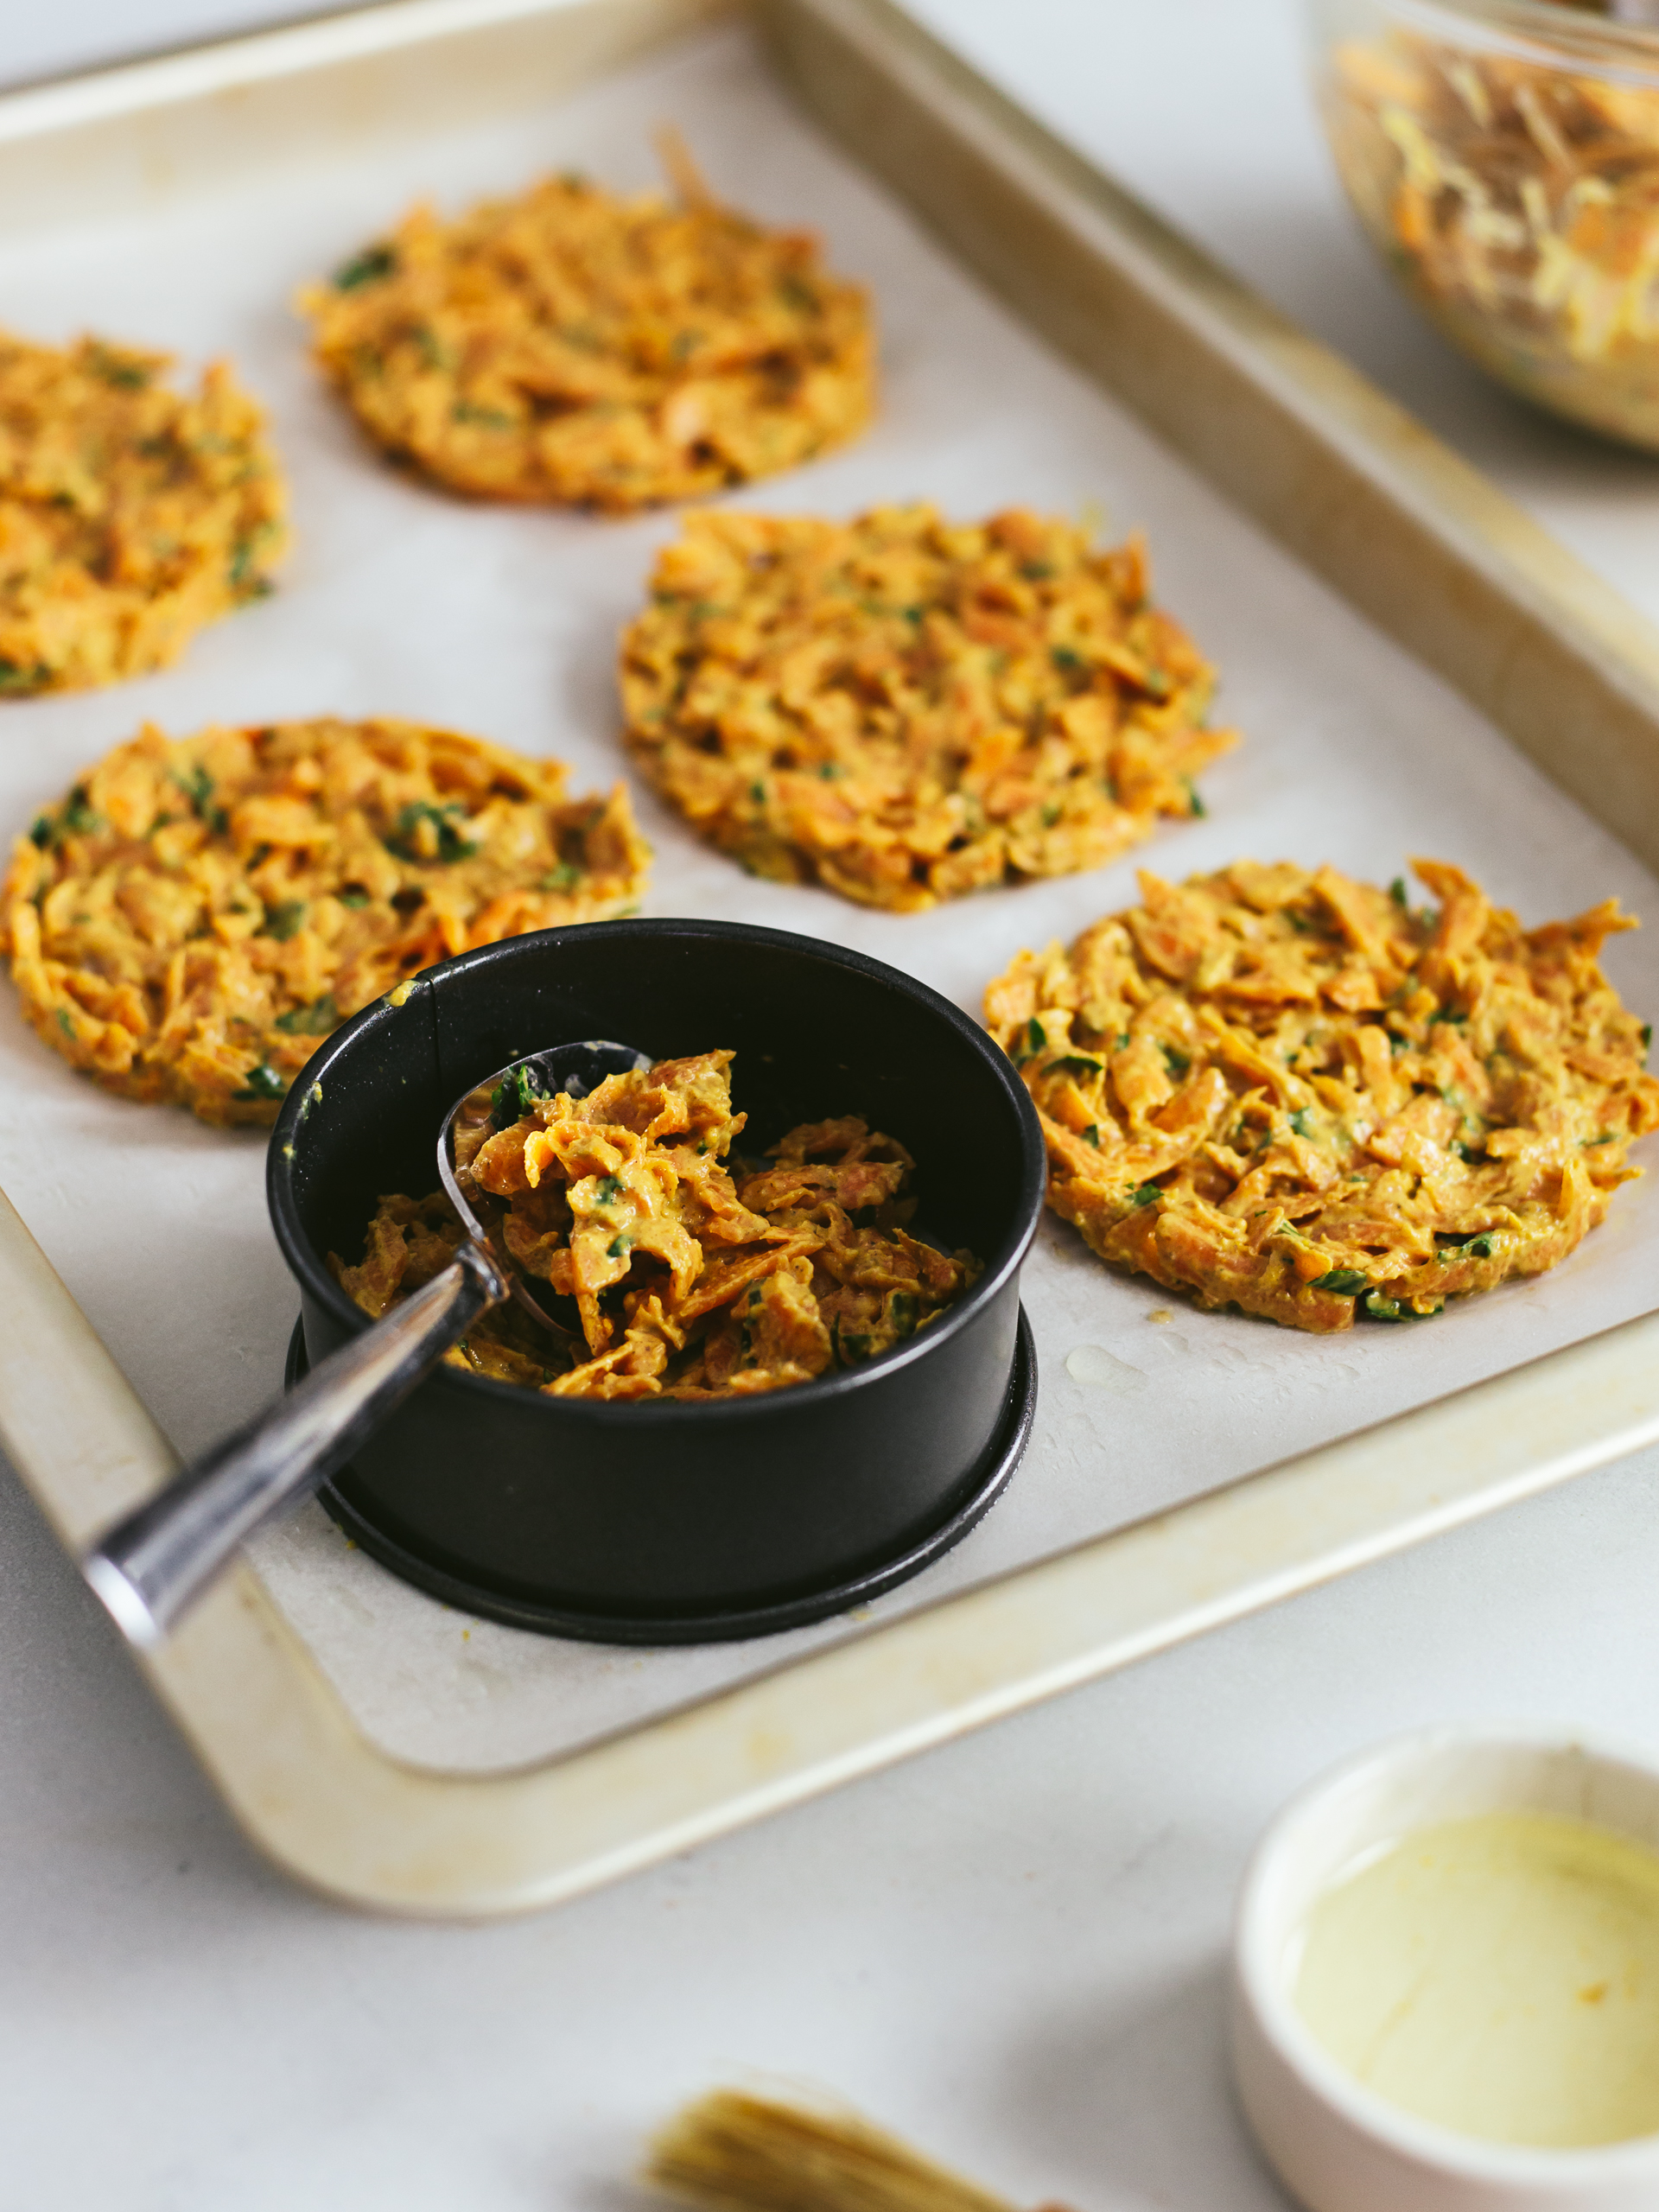 shaped carrot hash brown patties on a tray with a ring